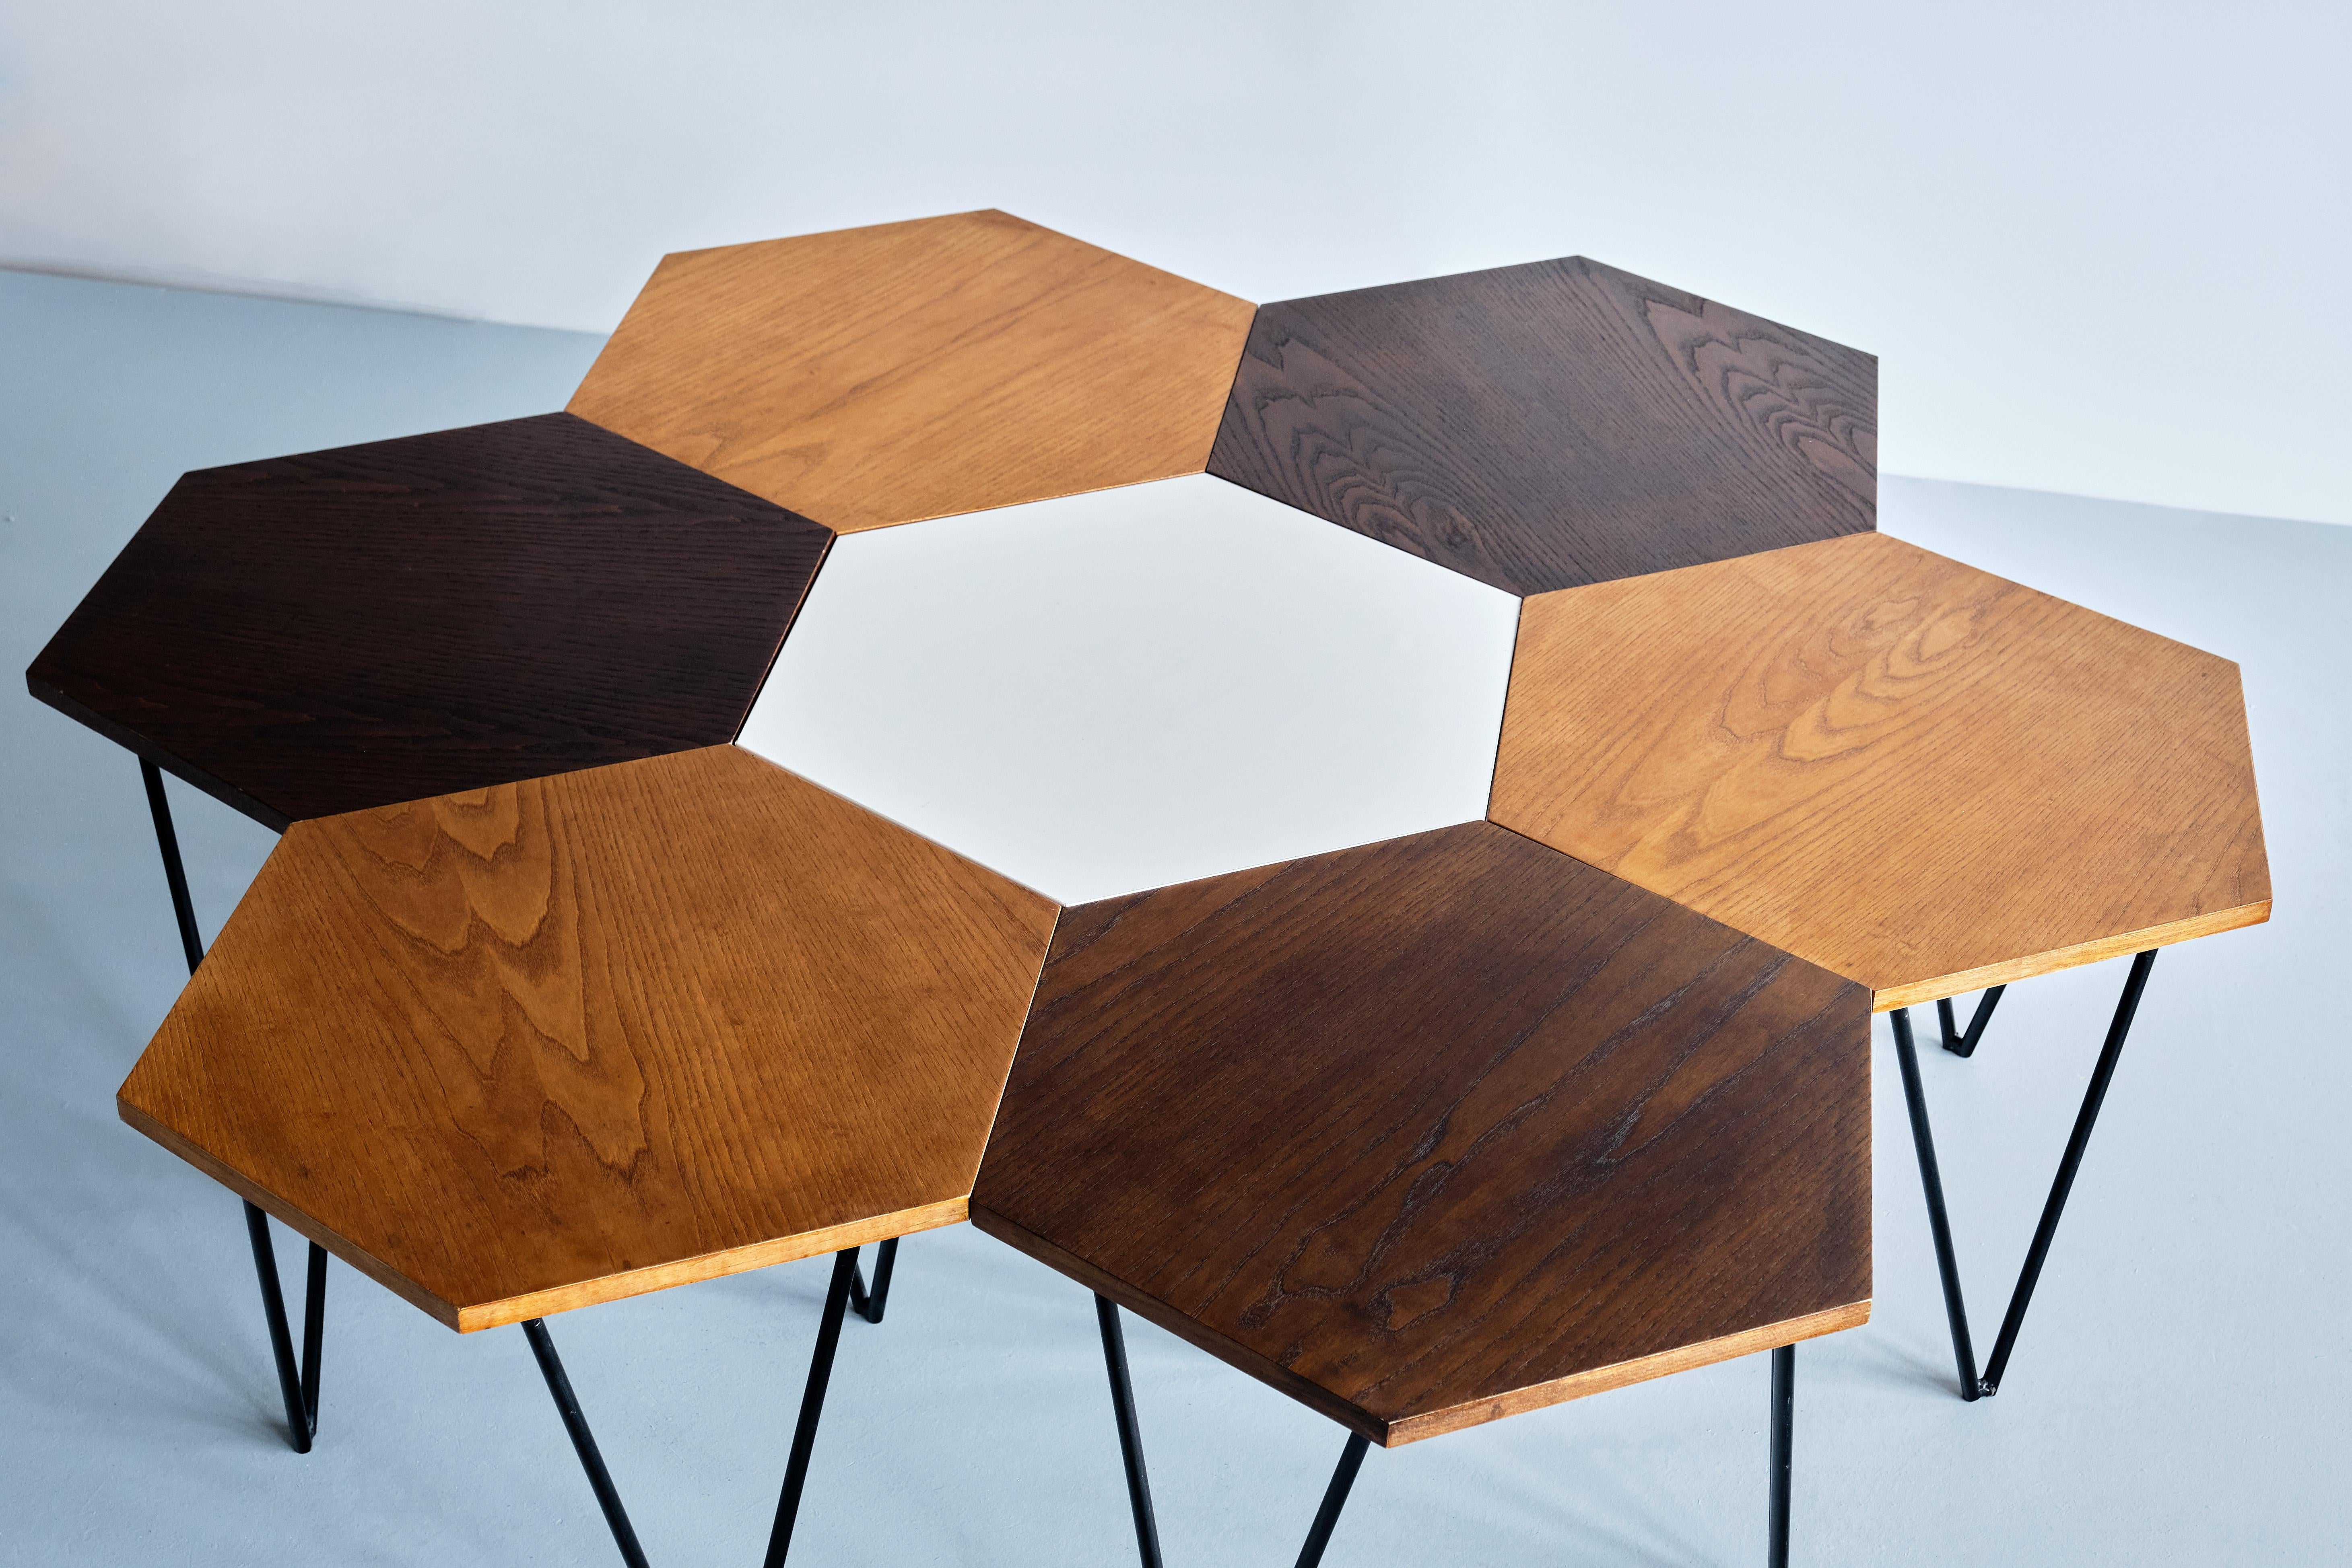 Set of 7 Gio Ponti Modular Hexagonal Coffee Tables, ISA Bergamo, Italy, 1950s In Good Condition For Sale In The Hague, NL